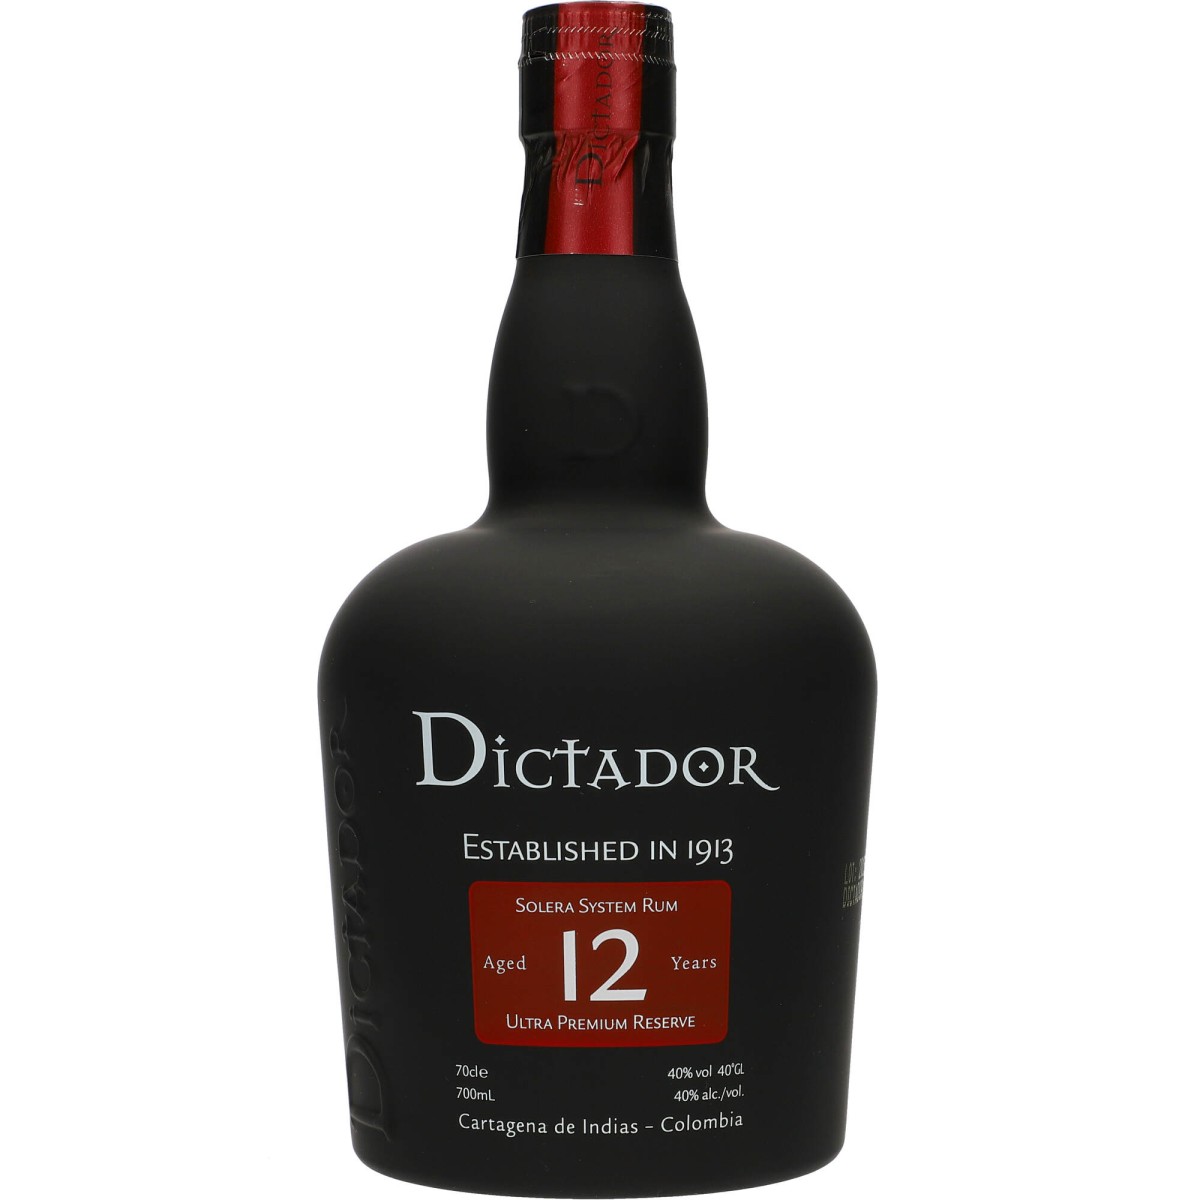 Dictador 12 Years 40% 70cl